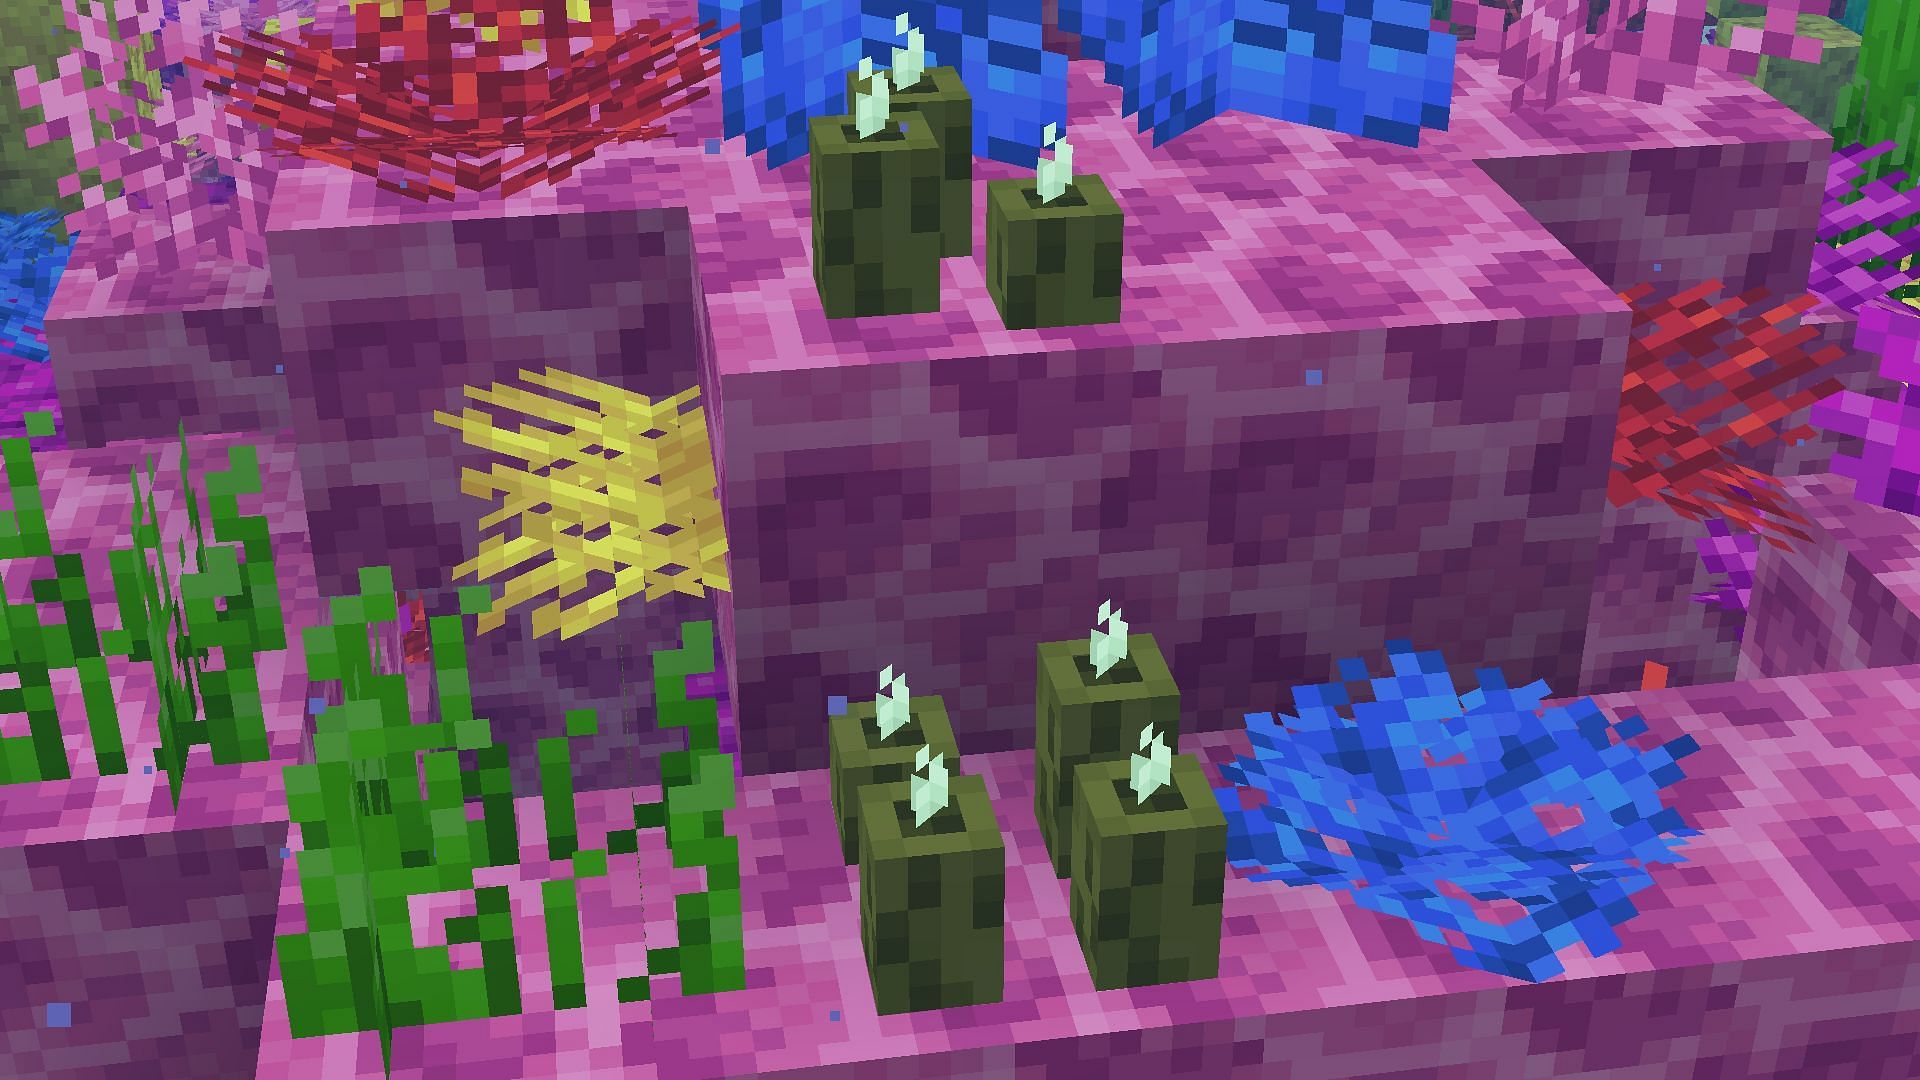 Sea pickles grow in warm oceans and in coral reefs (Image via Minecraft 1.19)